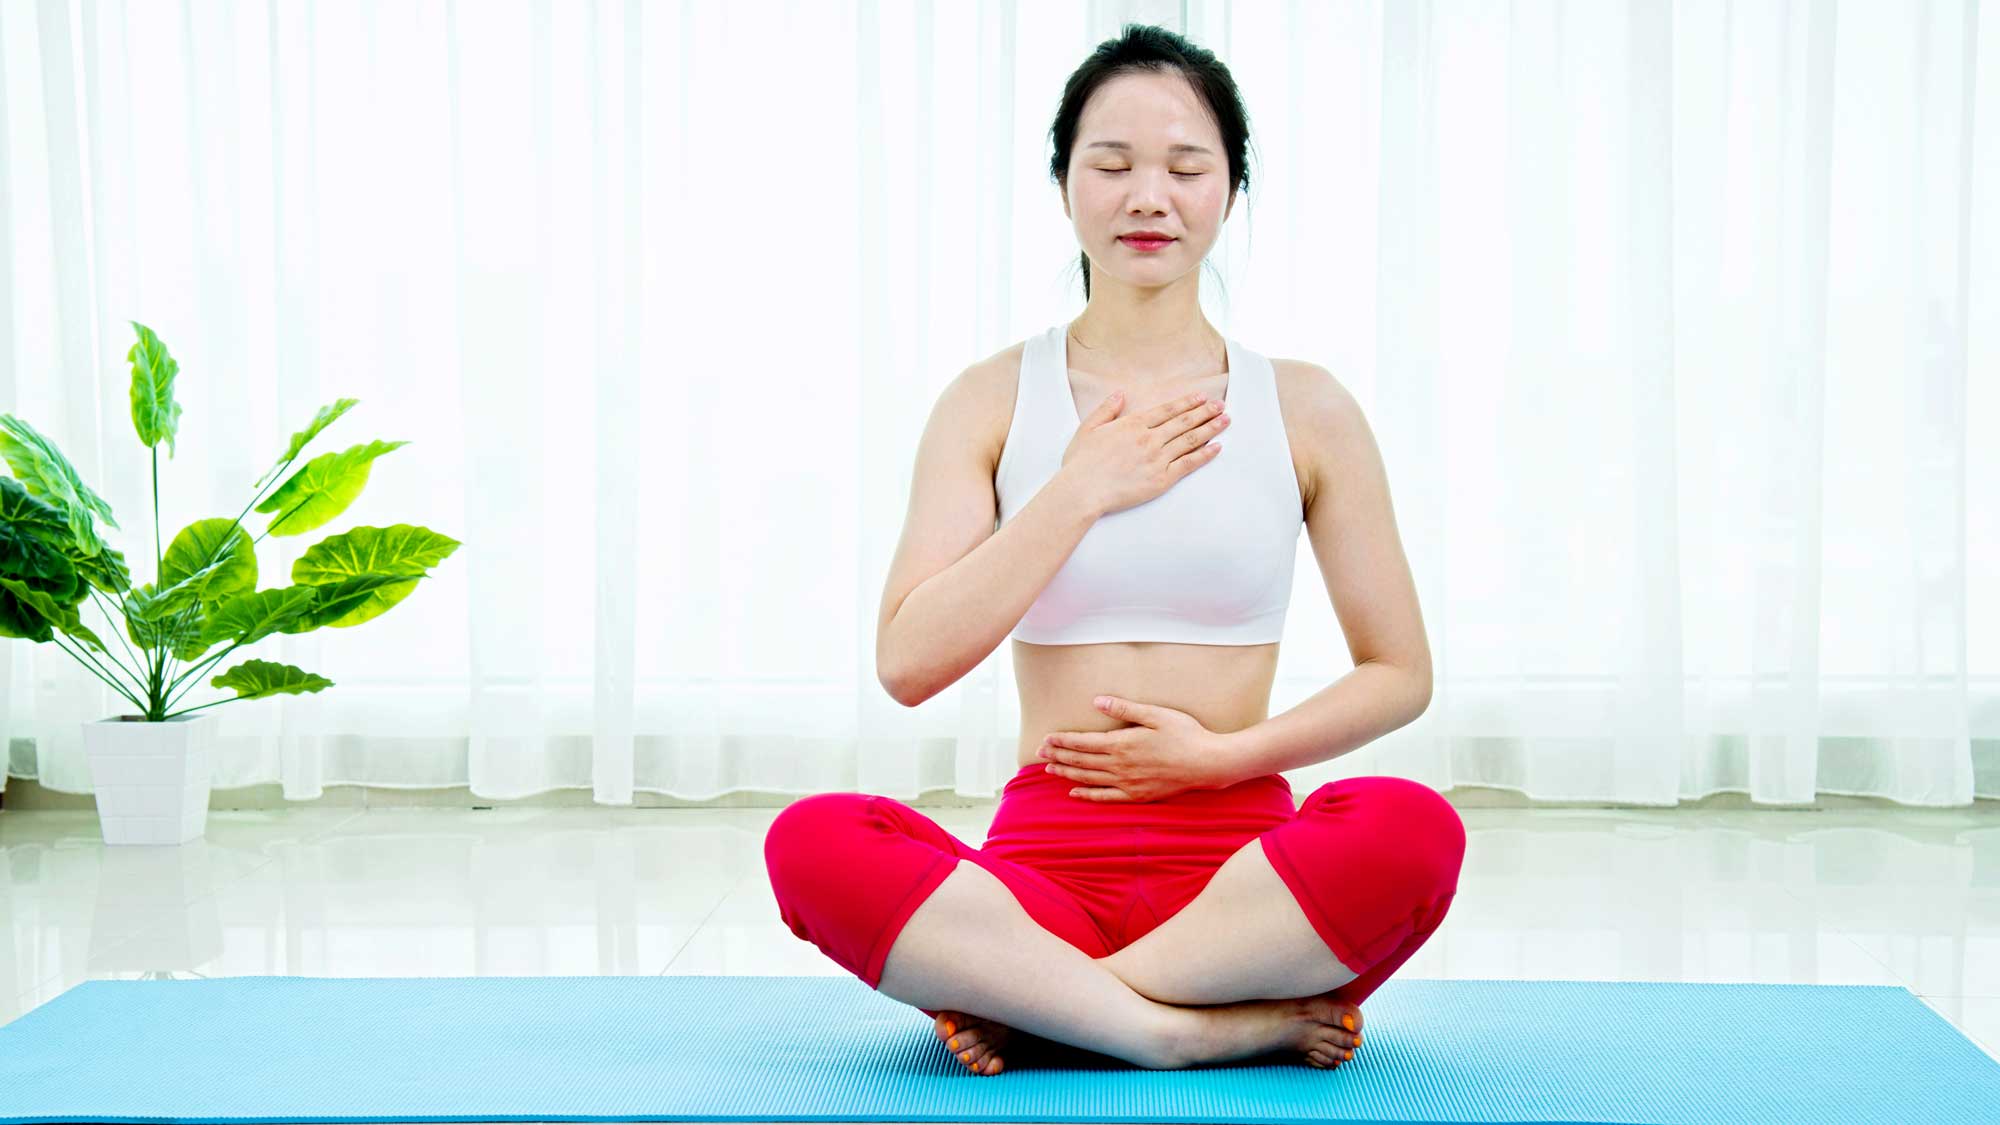 Rest and Digest: 8 Restorative Yoga Poses for Digestion - DoYou